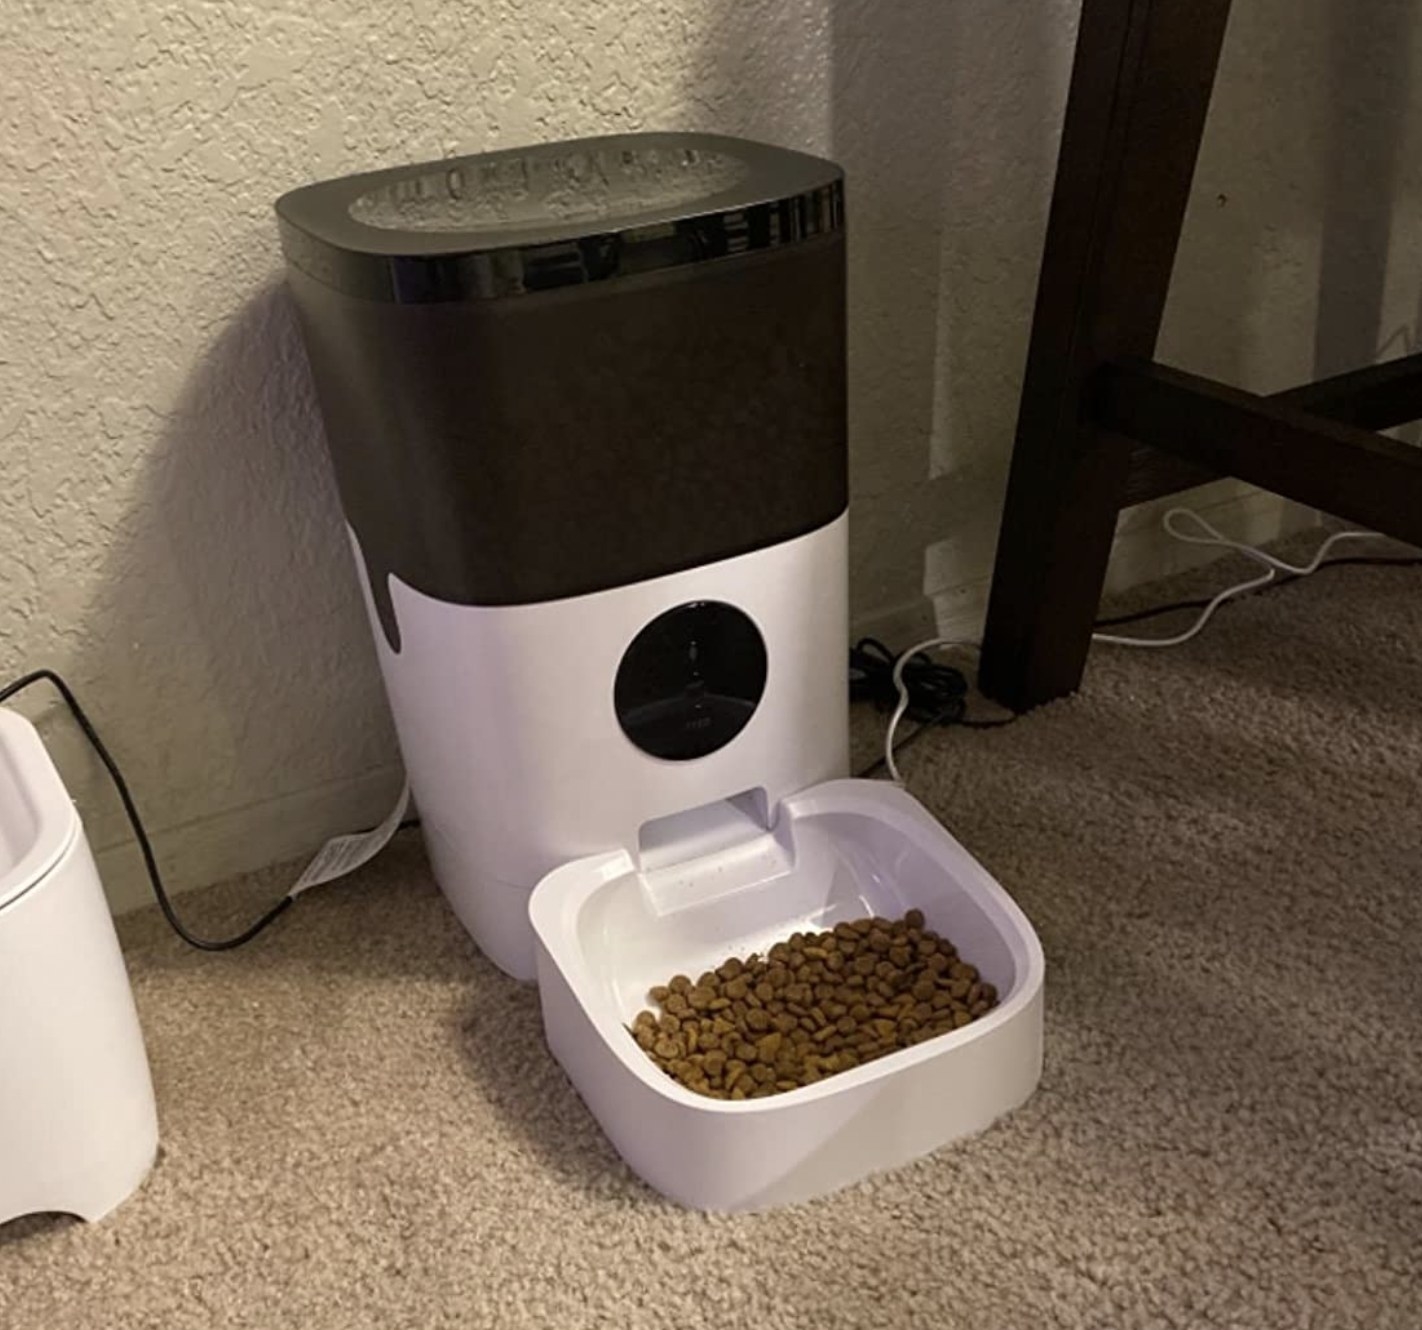 kibble dispensed onto a tray attacked to the automatic cat feeder